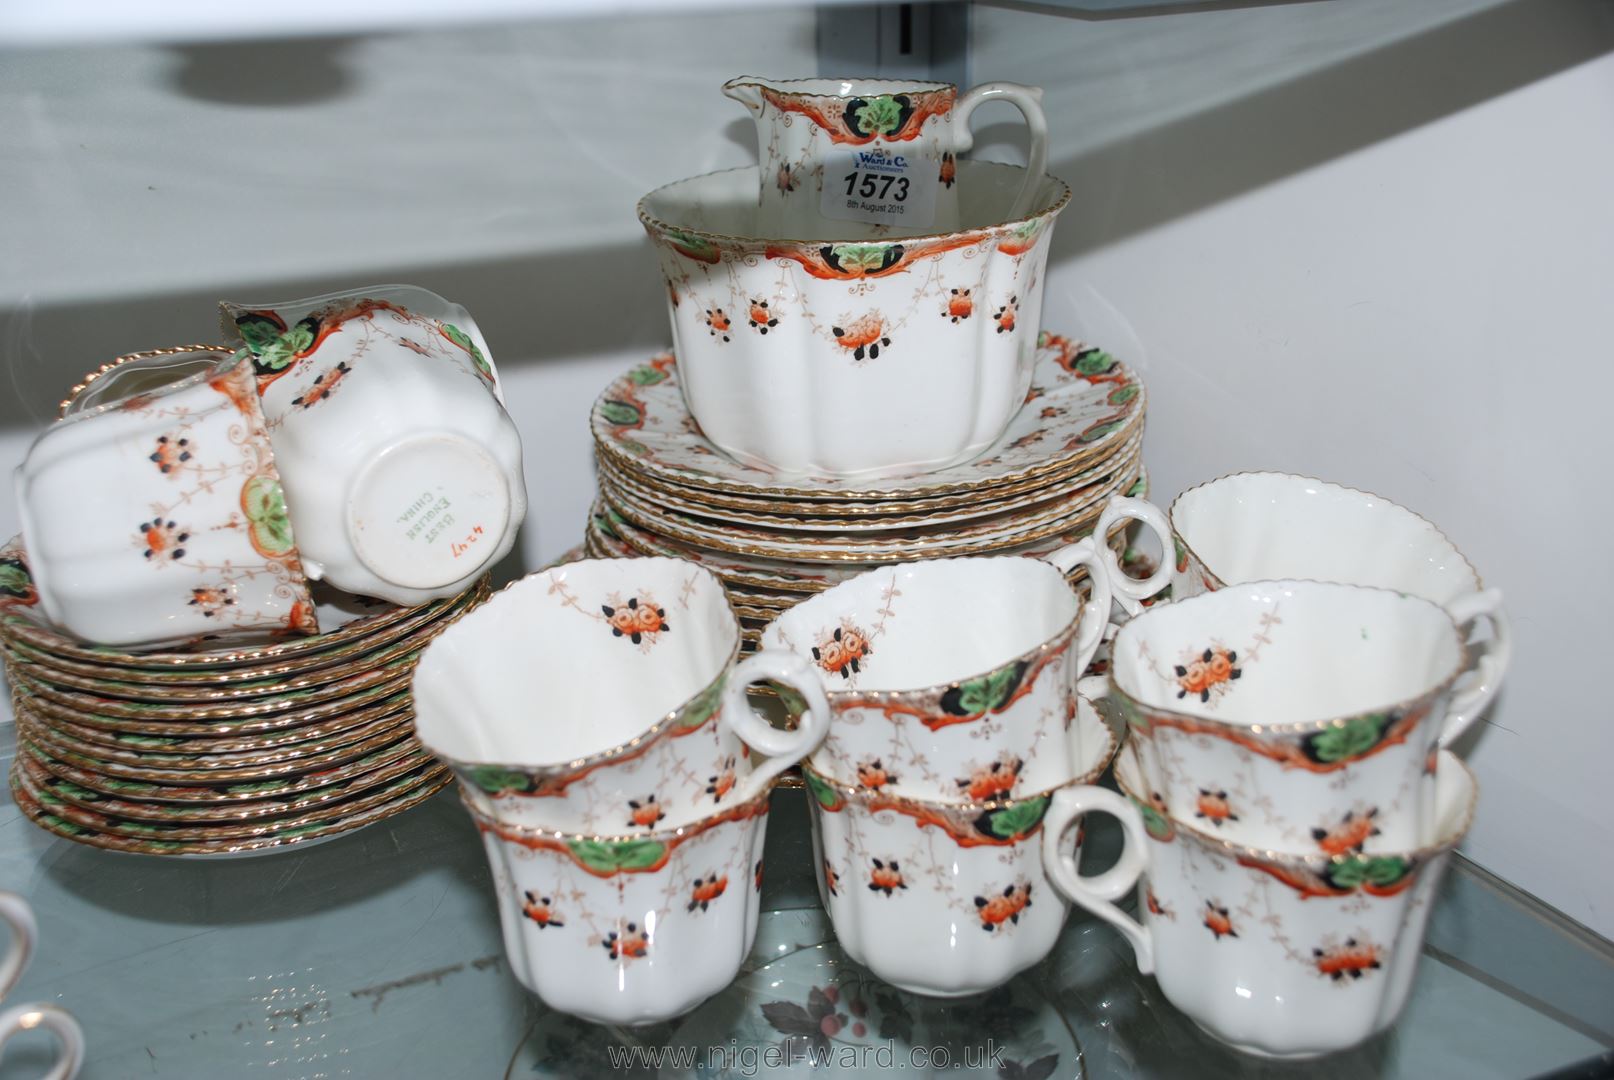 A twelve setting bone china Teaset in floral pattern with swags in orange and green, blue and white,